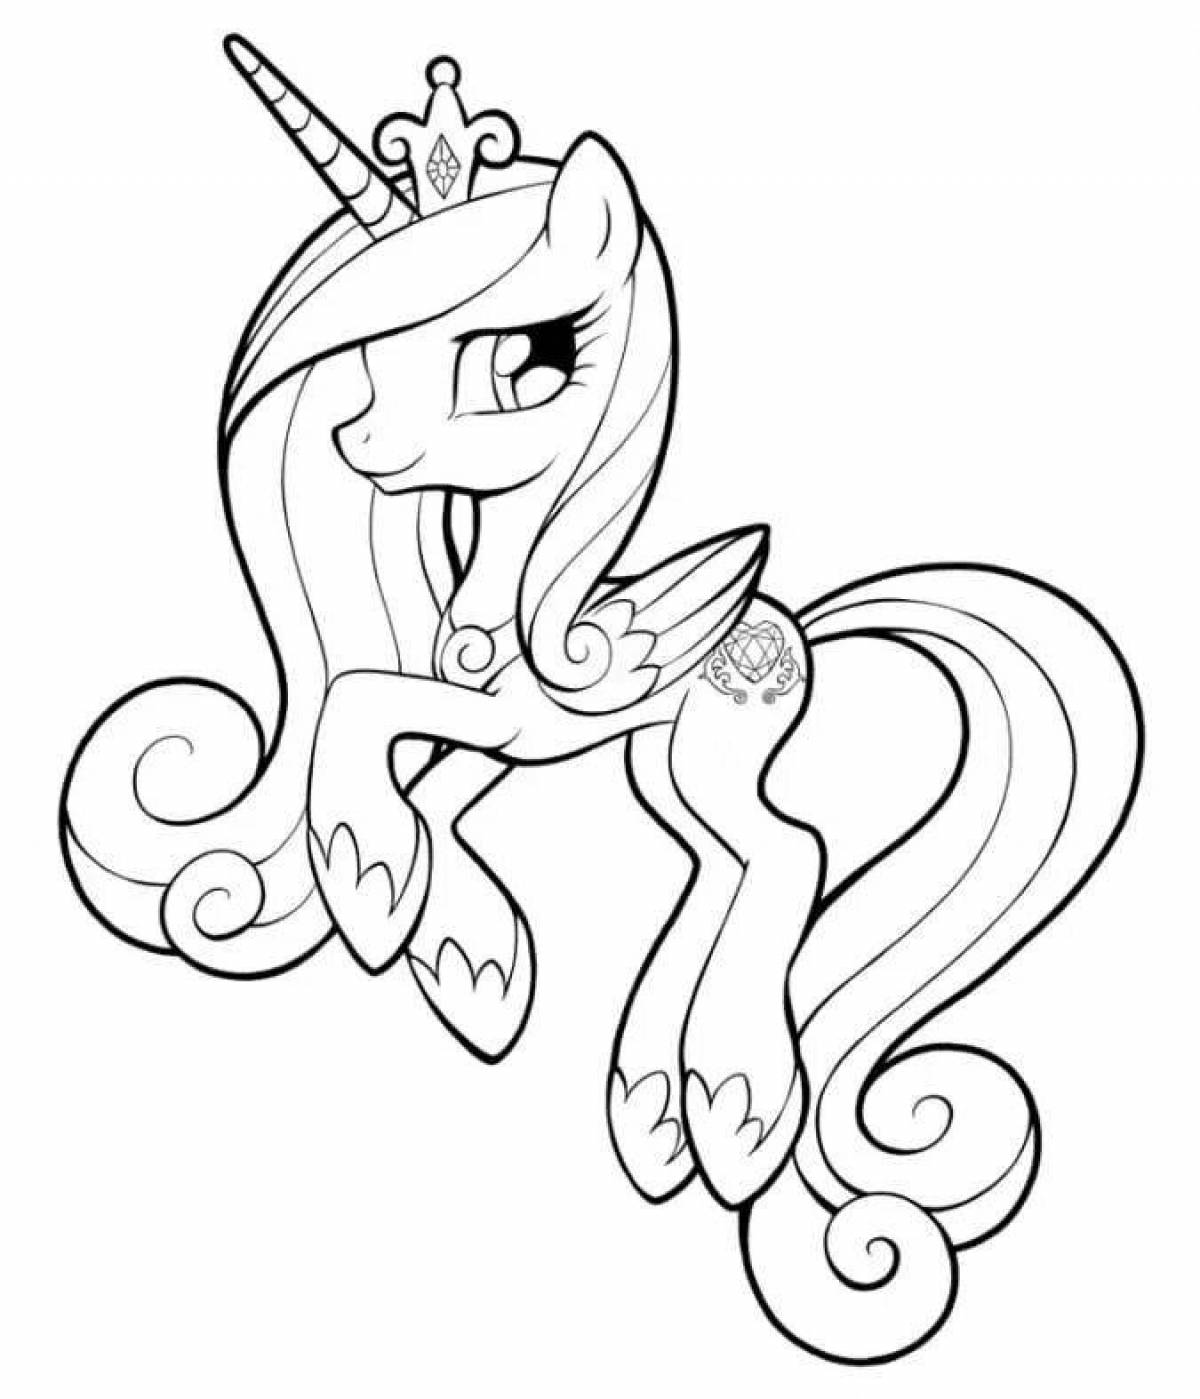 Color cadence coloring page